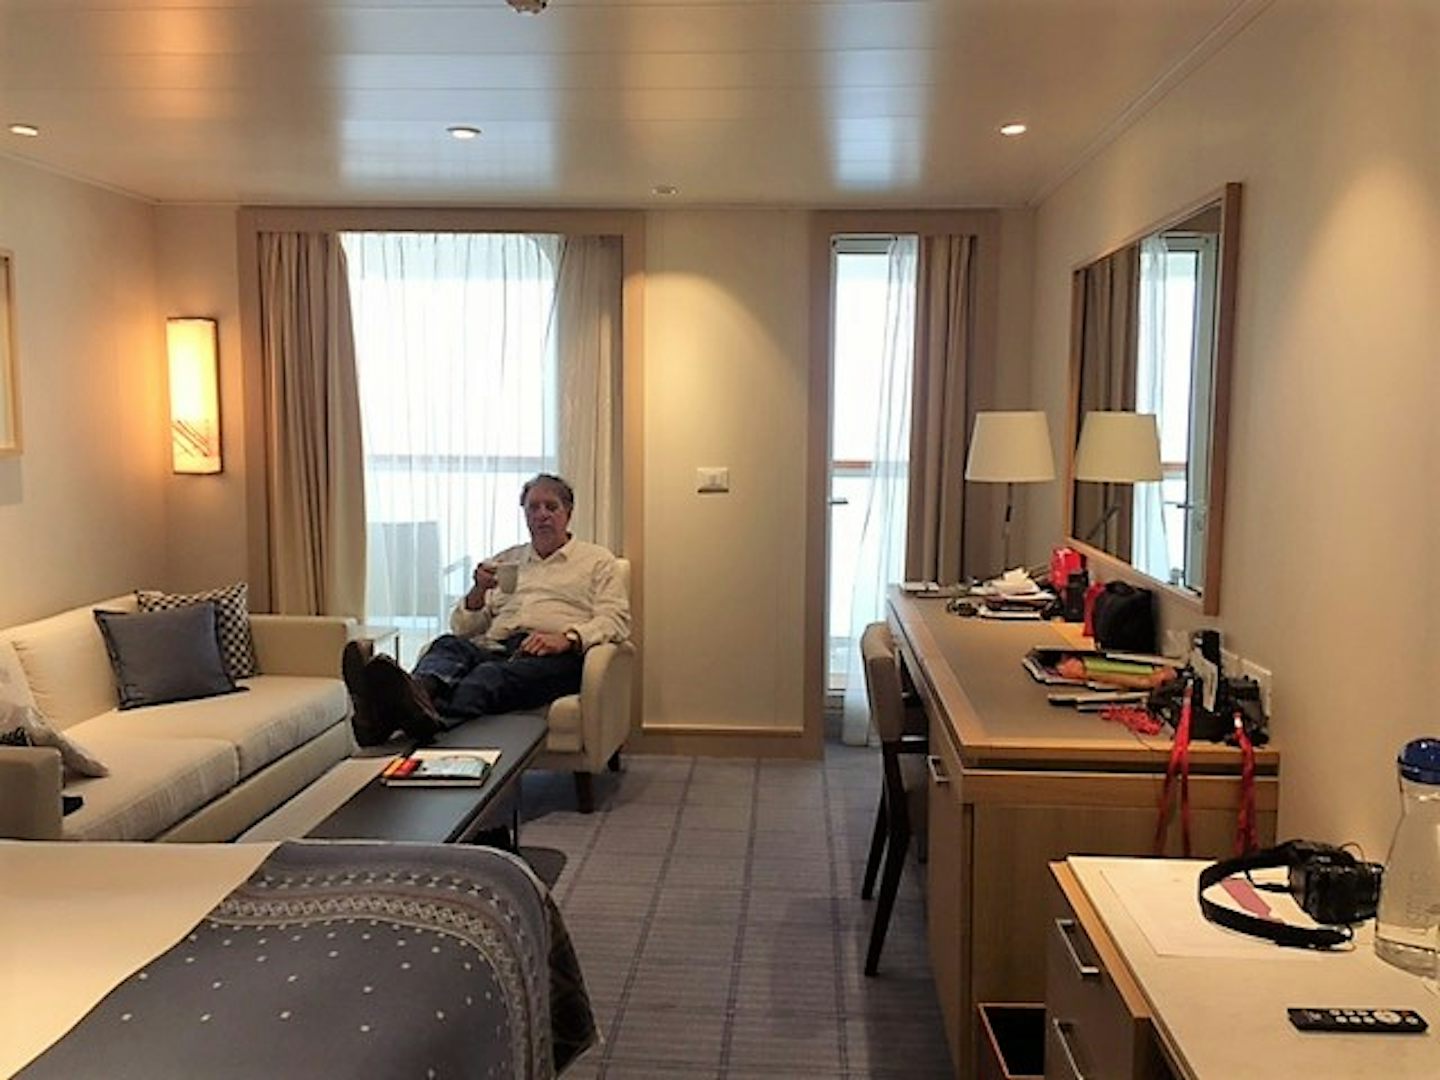 This is our wonderful stateroom. It had every amenity you could think of! Spacious and comfortable!